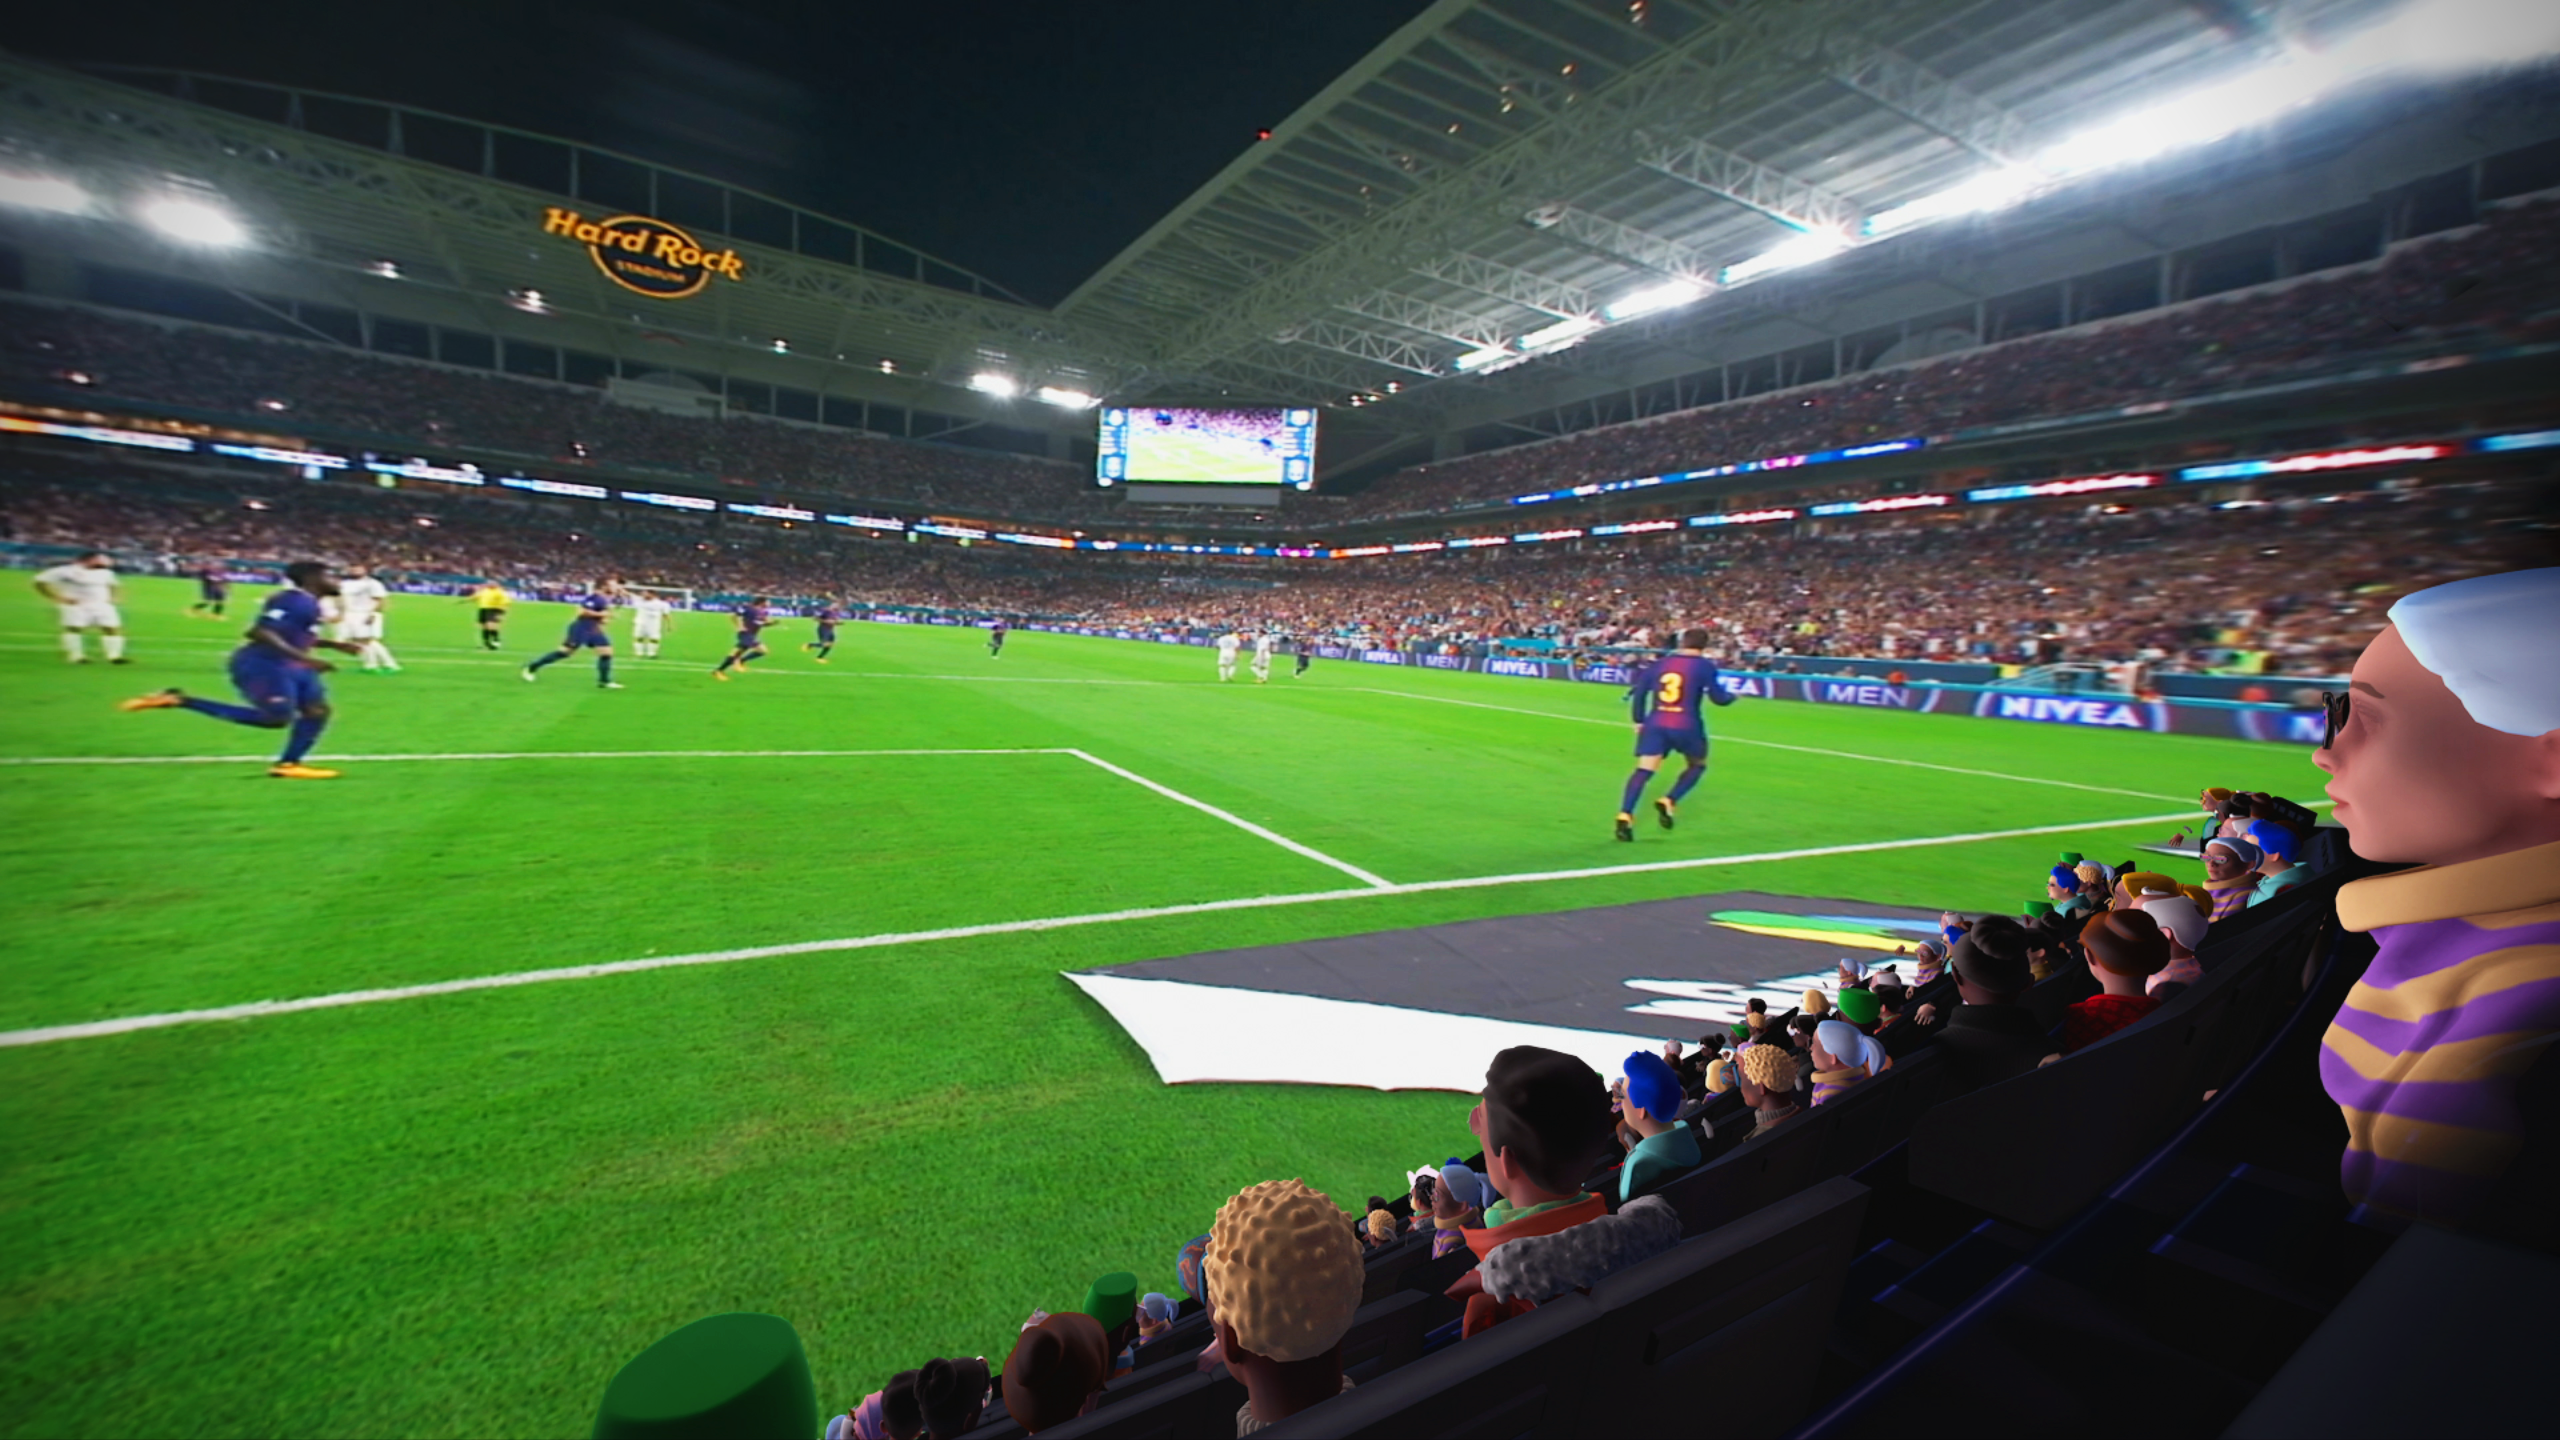 Oculus Venues tries to cram the stadium experience into a VR headset2560 x 1440